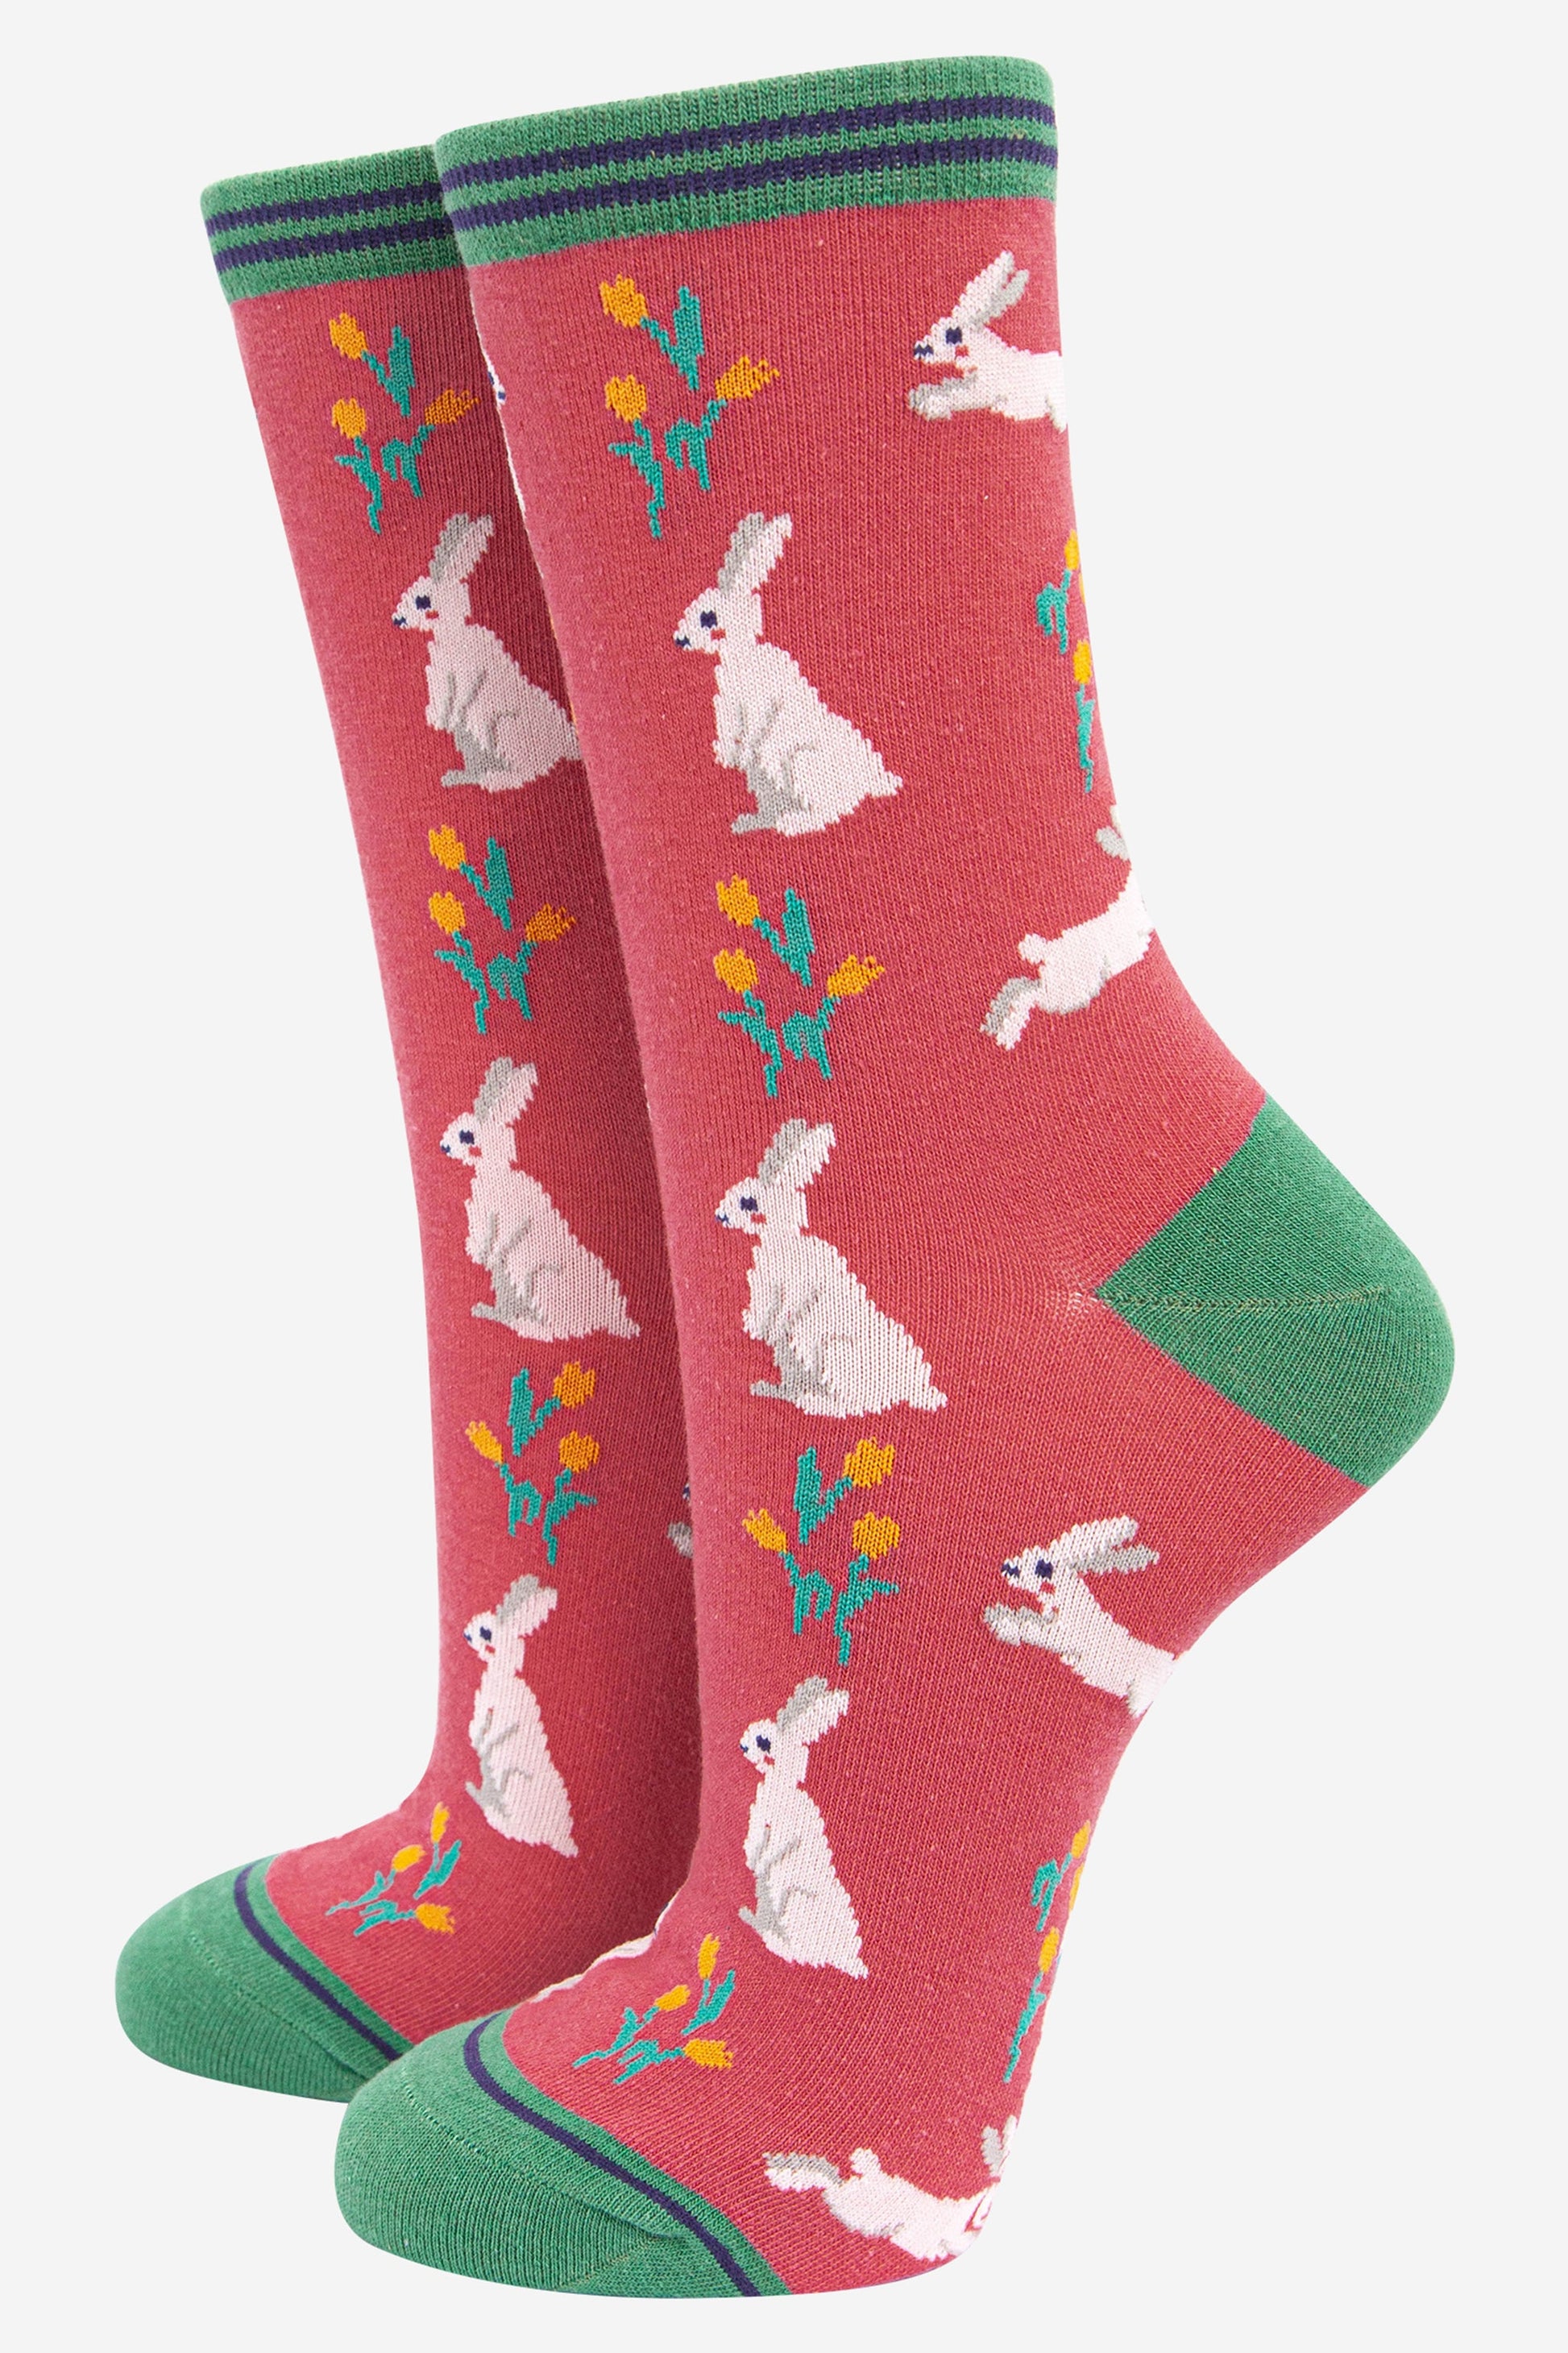 pink bamboo socks with green heel, toe and cuff featuring white rabbits and yellow spring daffodils